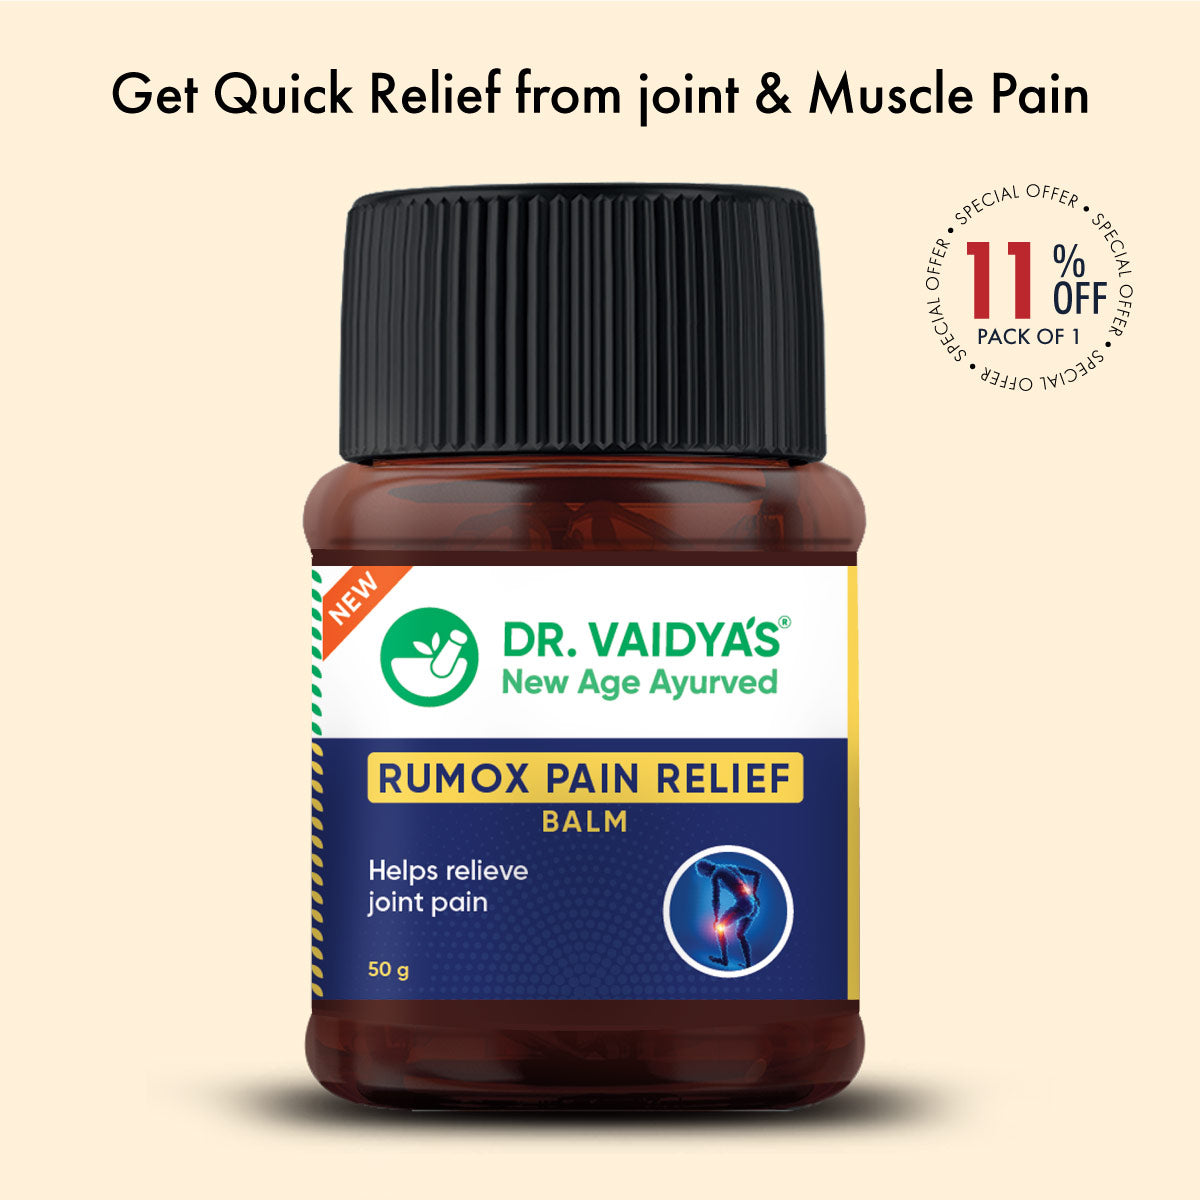 Dr. Vaidya’s Rumox Pain Relief Balm: For Joint Pain, Stiffness, & Muscle Soreness